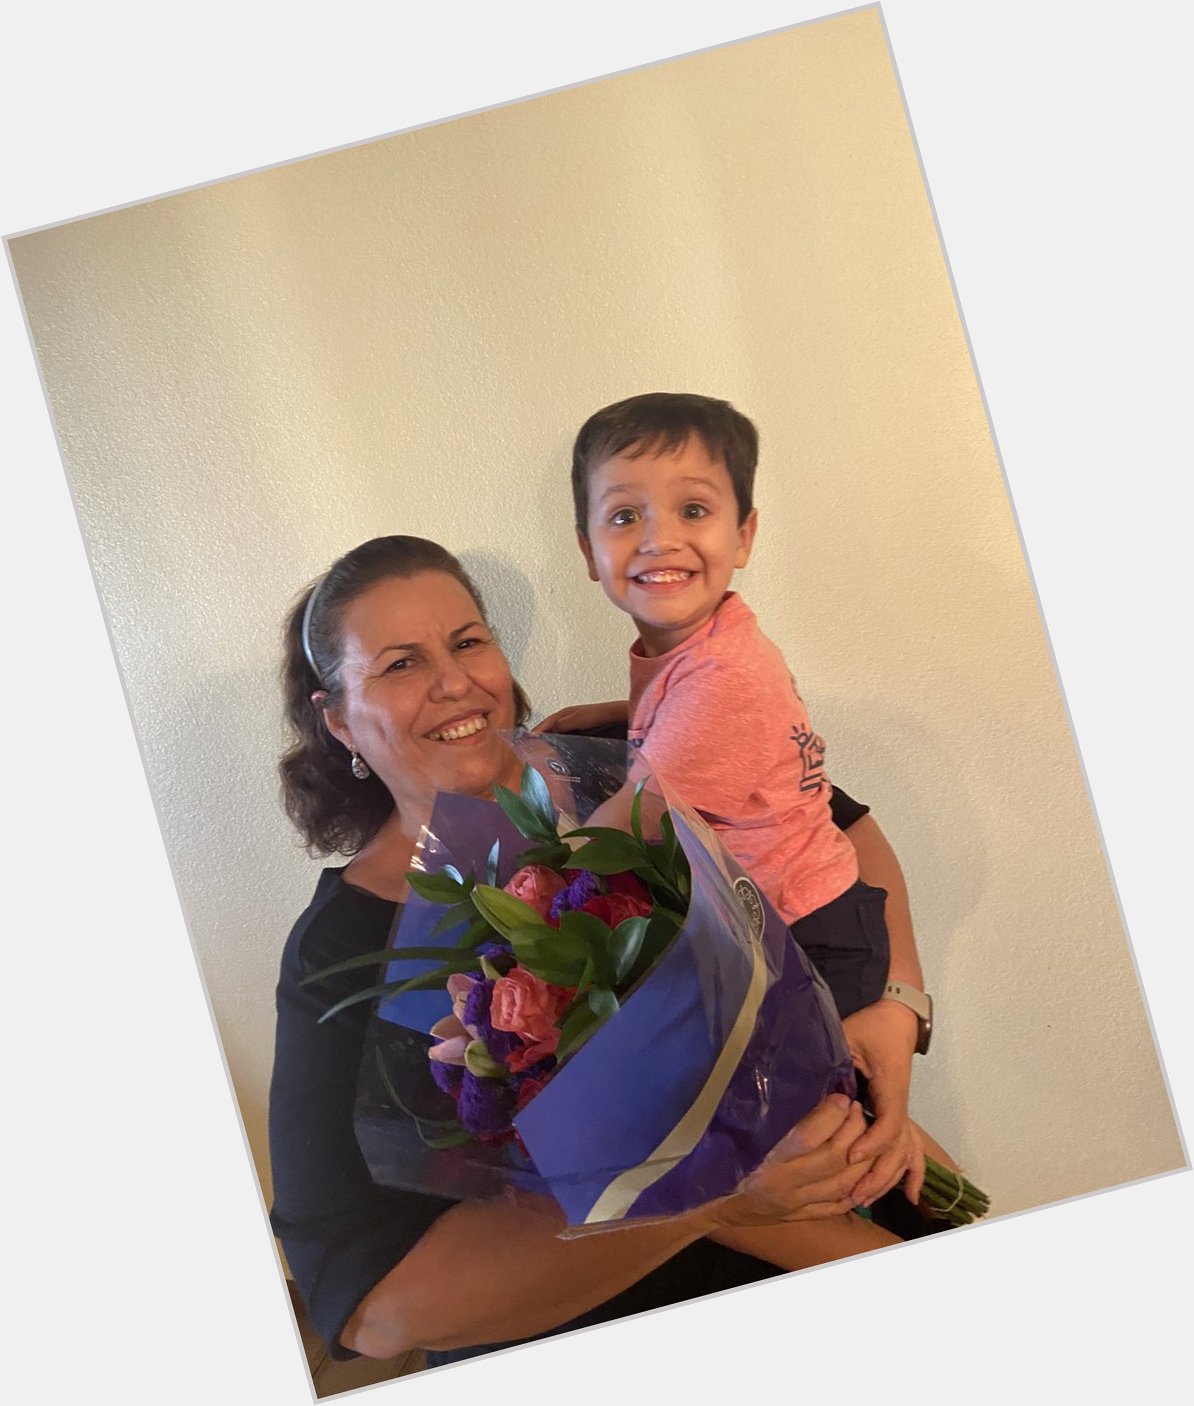 This Big Boy brought guela flowers for her birthday. Happy birthday guela!! We love you!!        